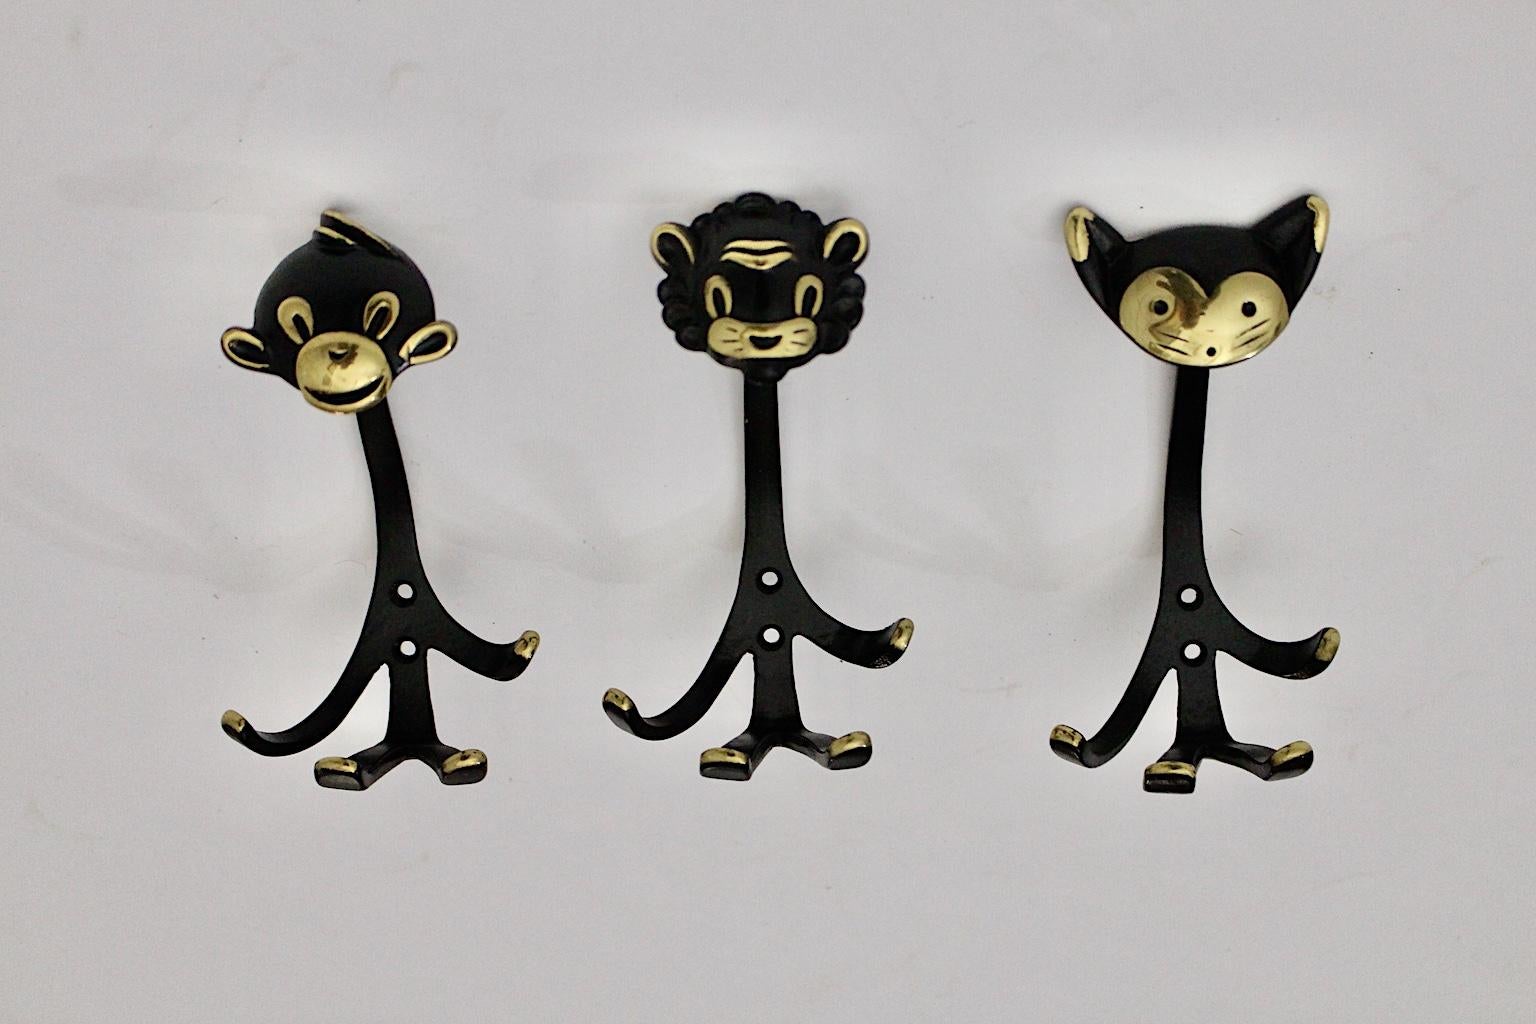 Mid-Century Modern vintage brass black set of 3 wall hooks in animal form, 1950s, Austria.
The wall hooks are easy to fix with two screws.
The vintage condition is very good with some signs of age and use.
Approx. measures:
Width 9 cm
Depth 8.5